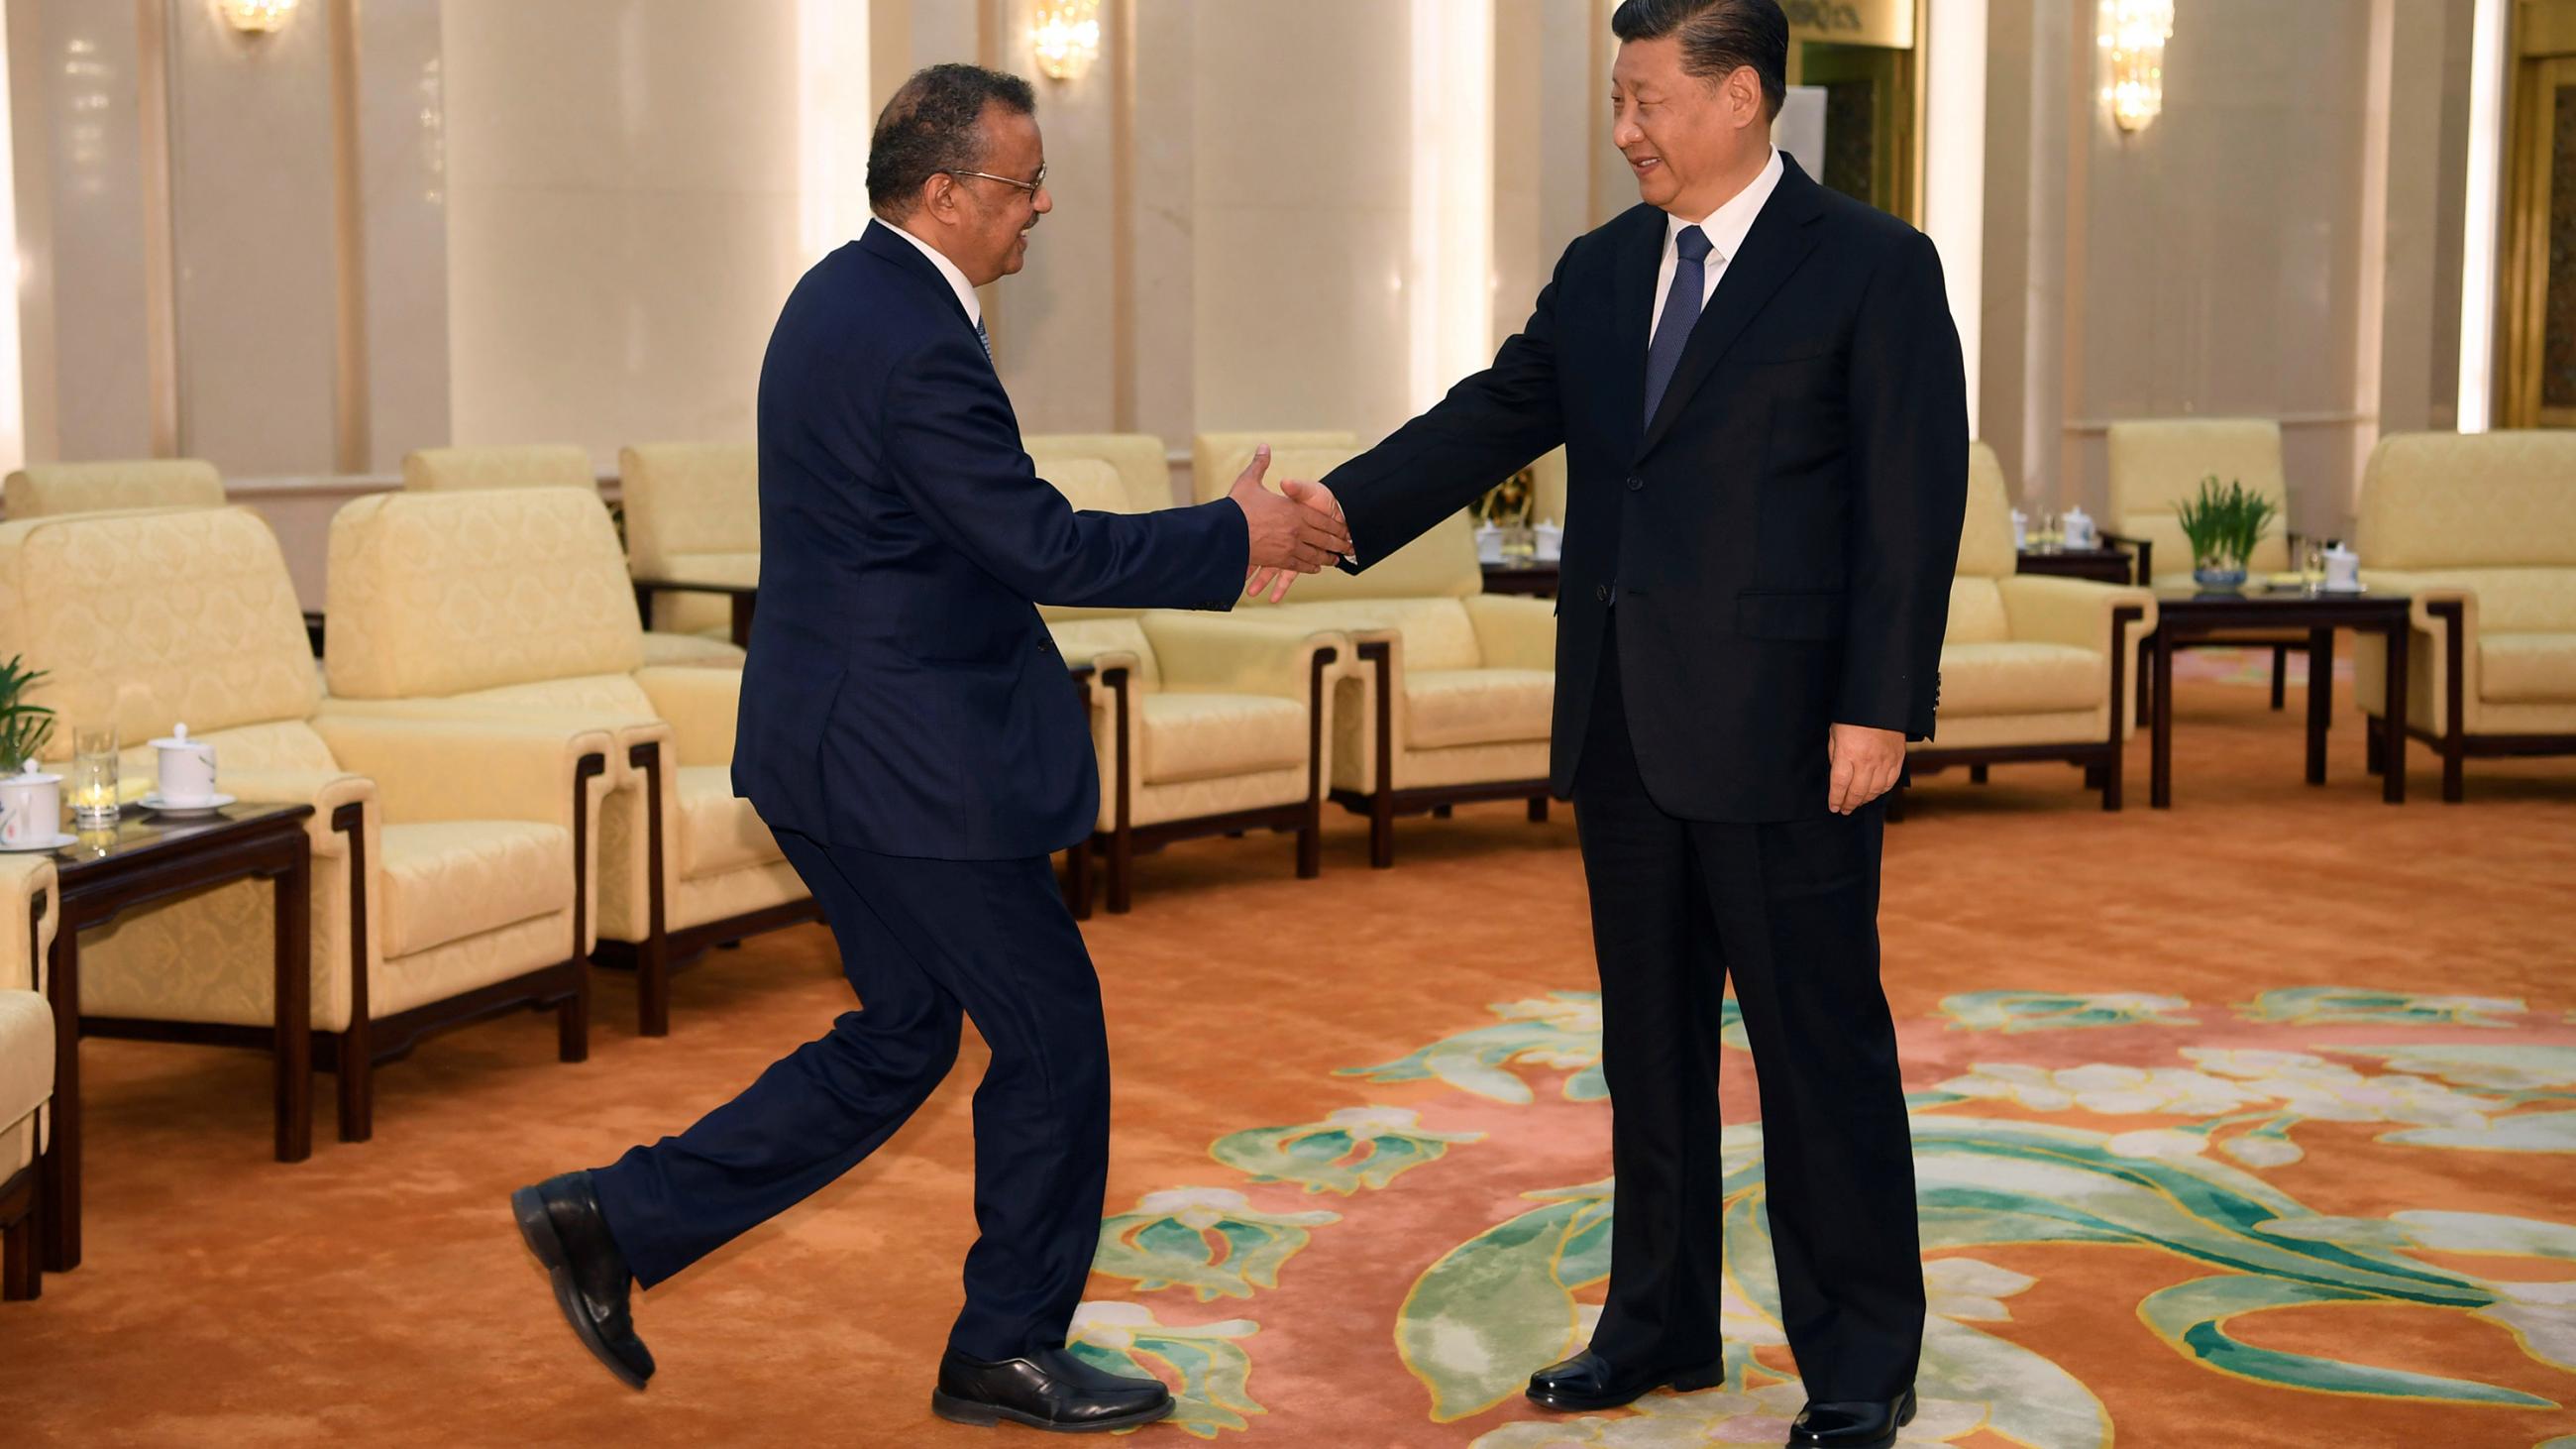 The photo shows the two leaders shaking hands and smiling. 